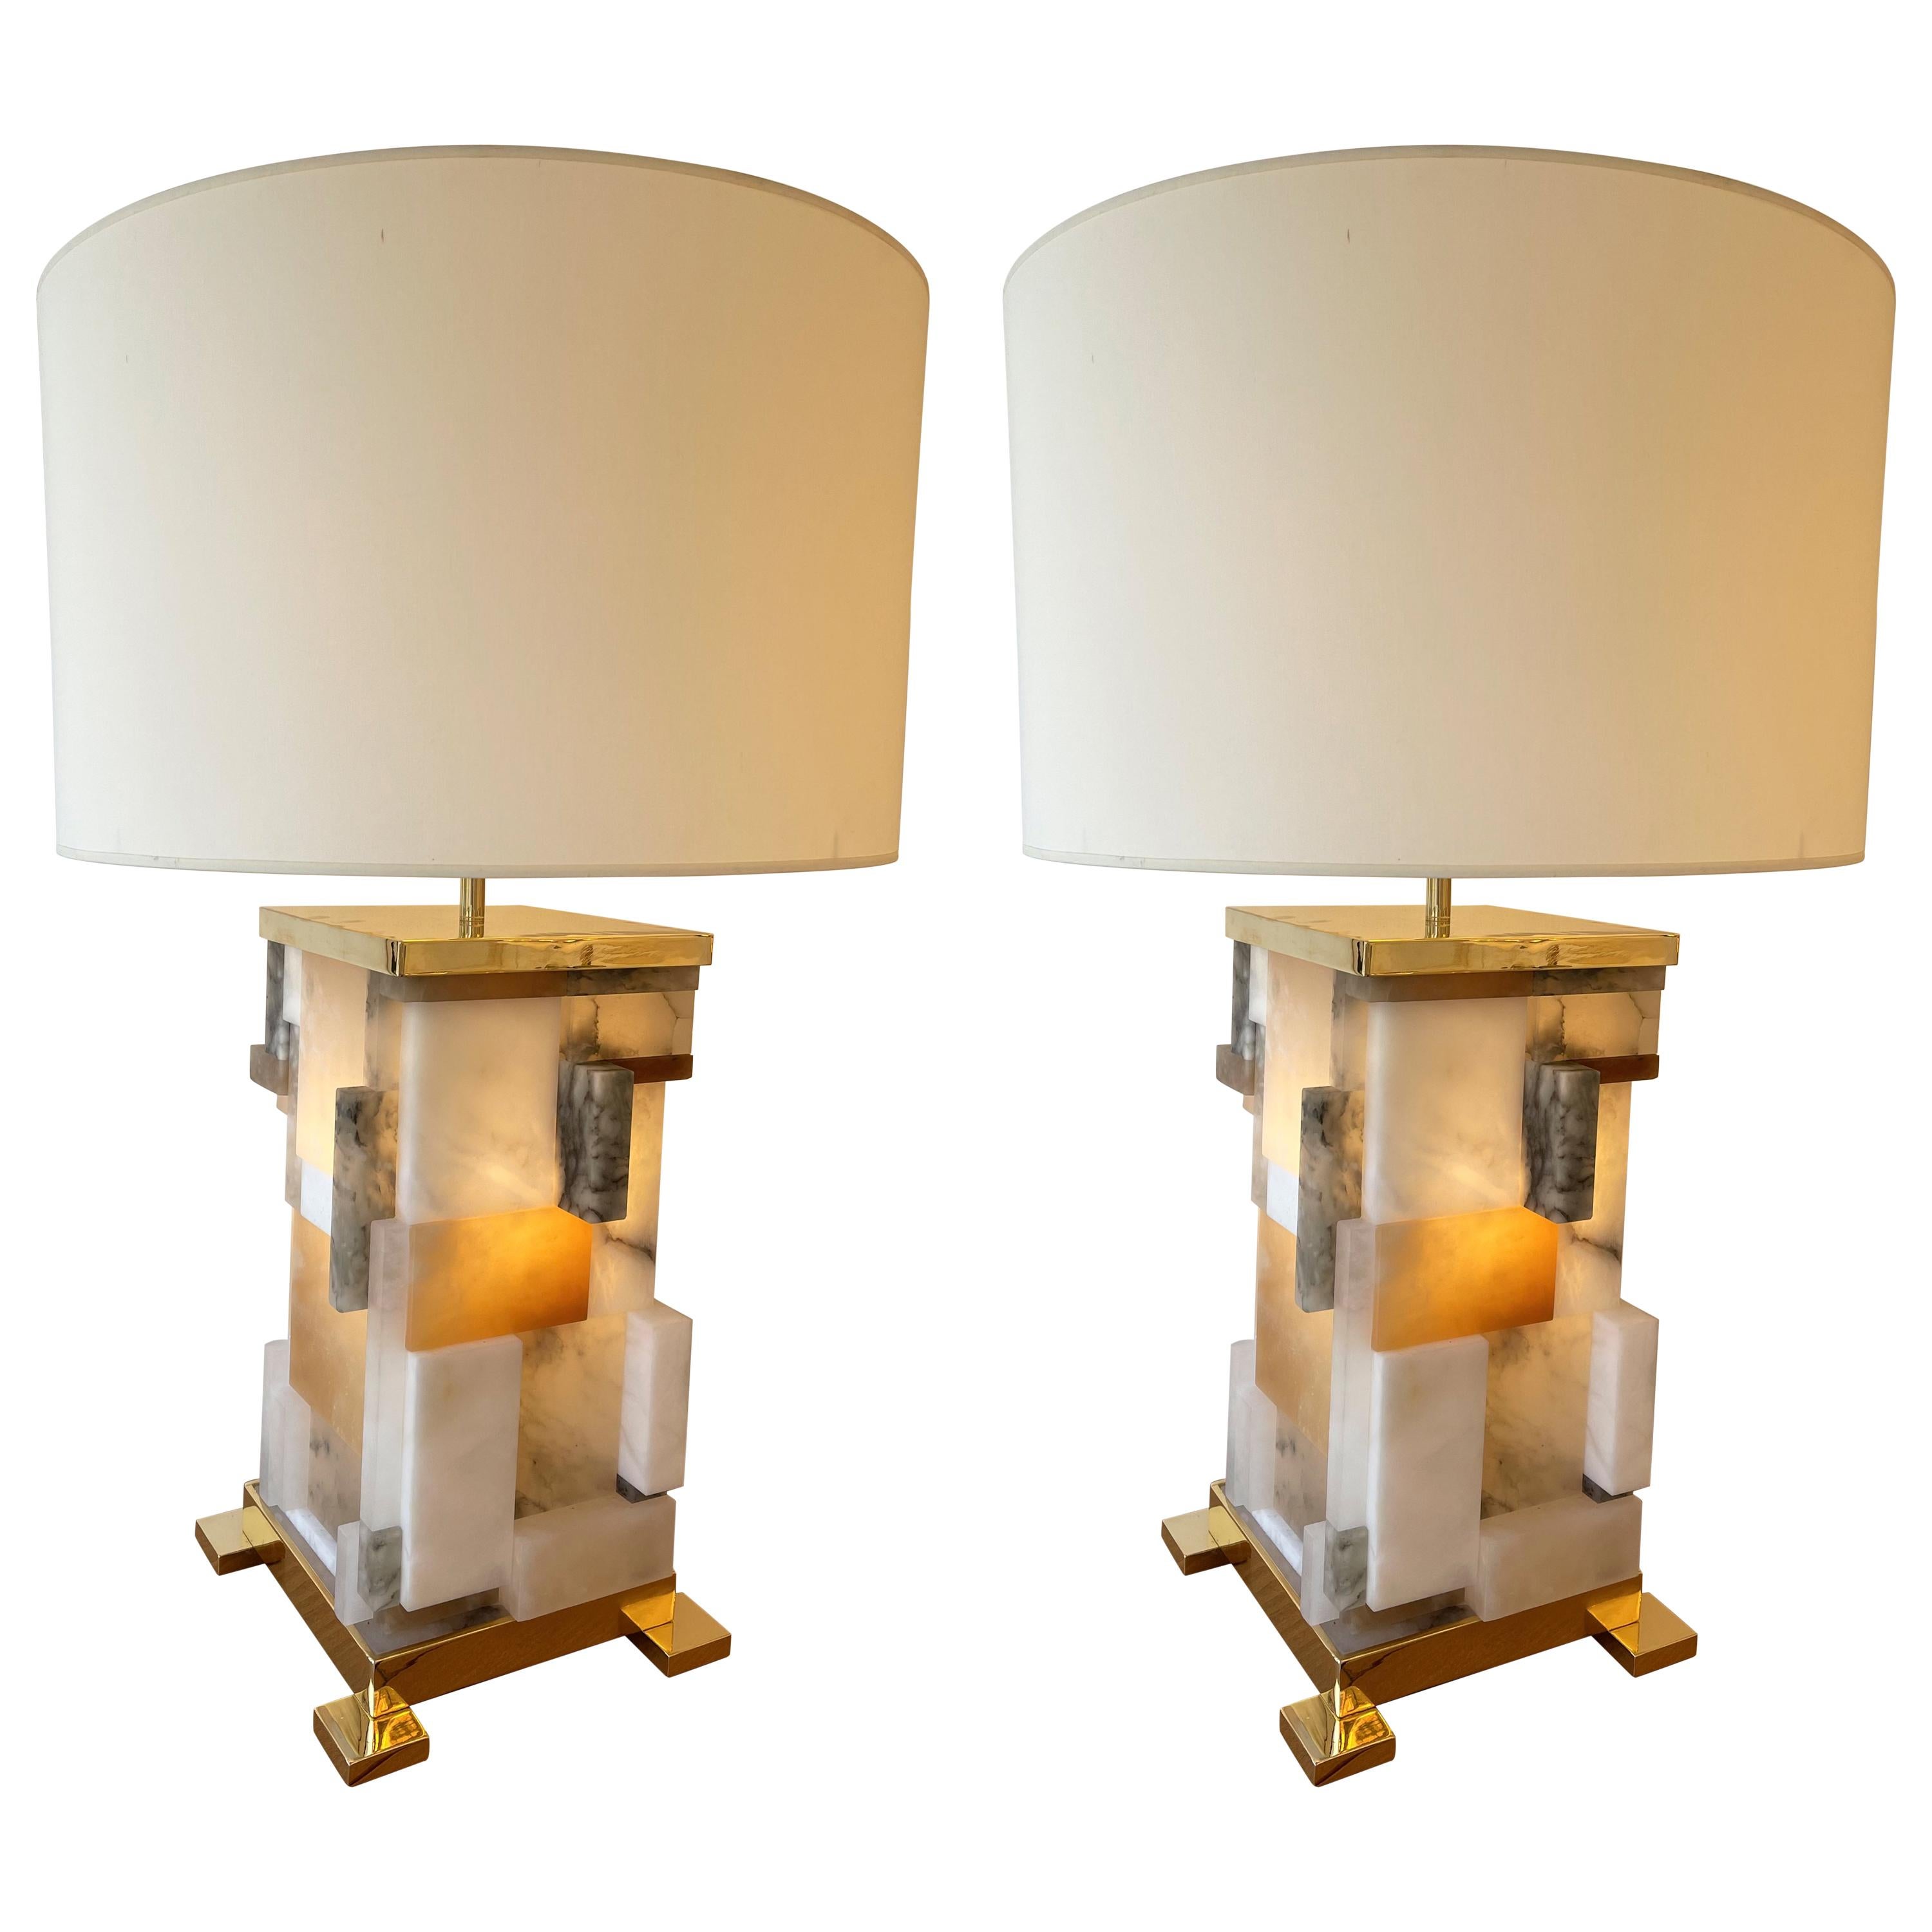 Contemporary Pair of Alabaster Gilt Metal Cubismi Lamps by Cagianelli, Italy